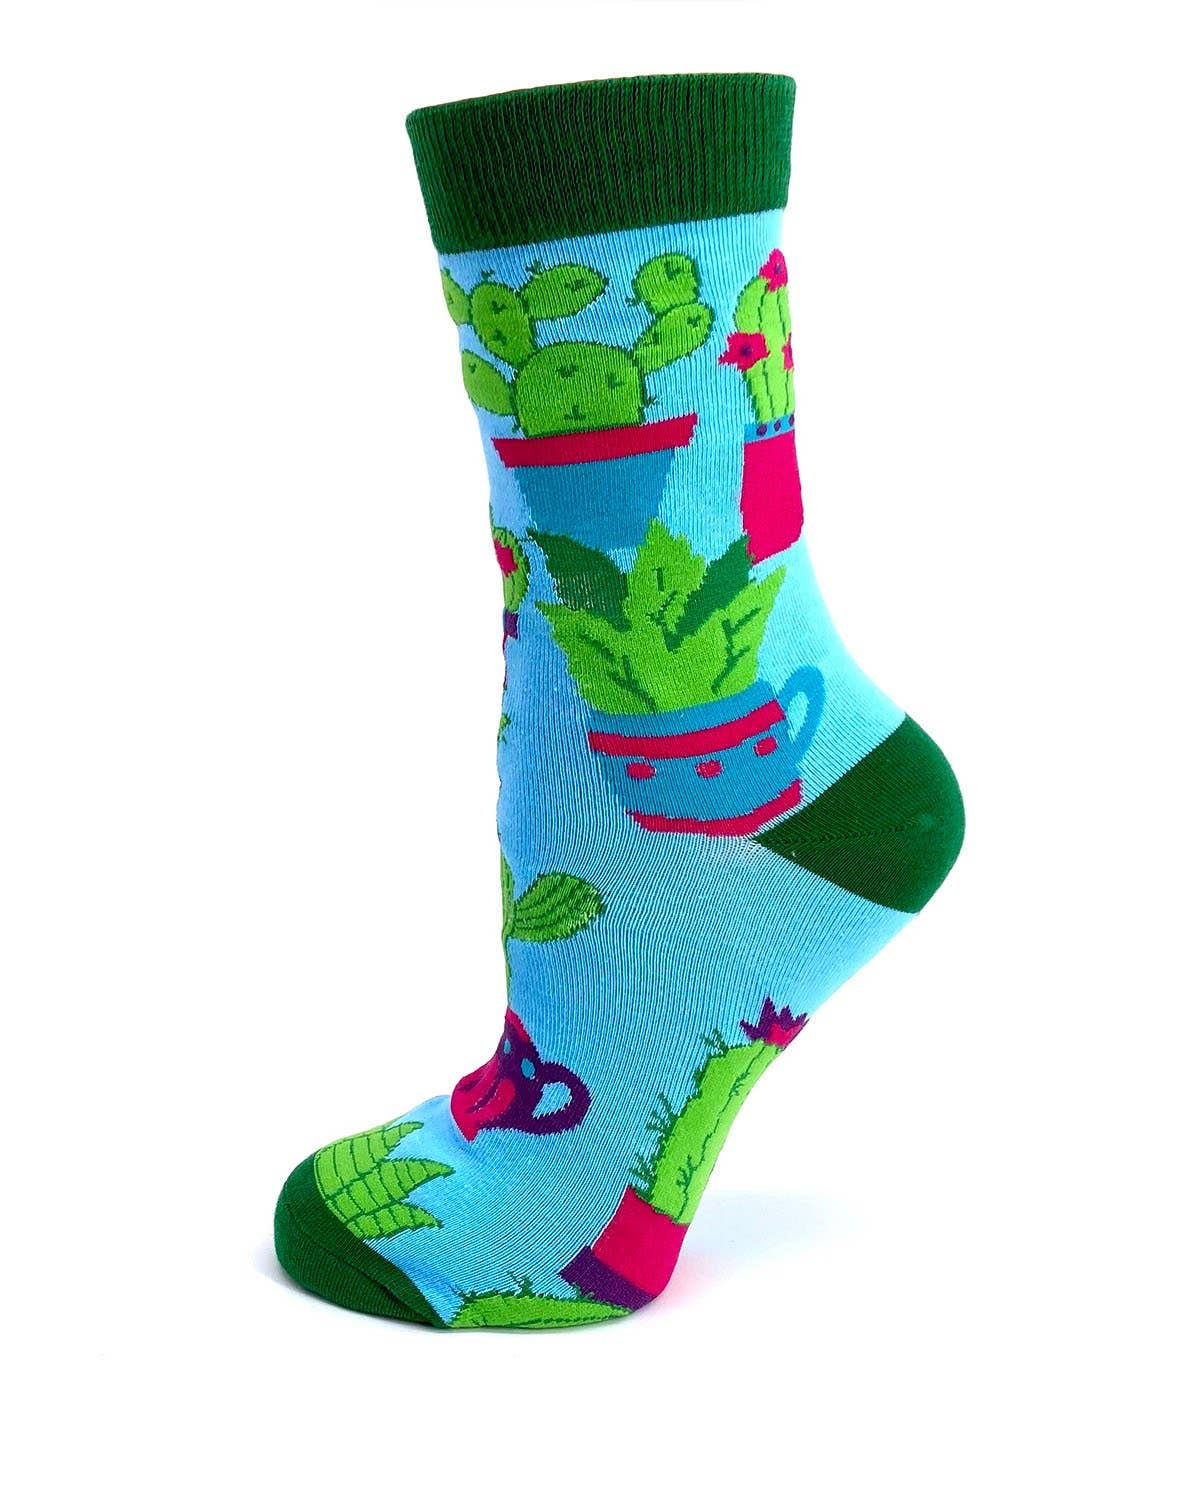 Can't Touch This Women's Crew Socks Featuring Prickly Cactus